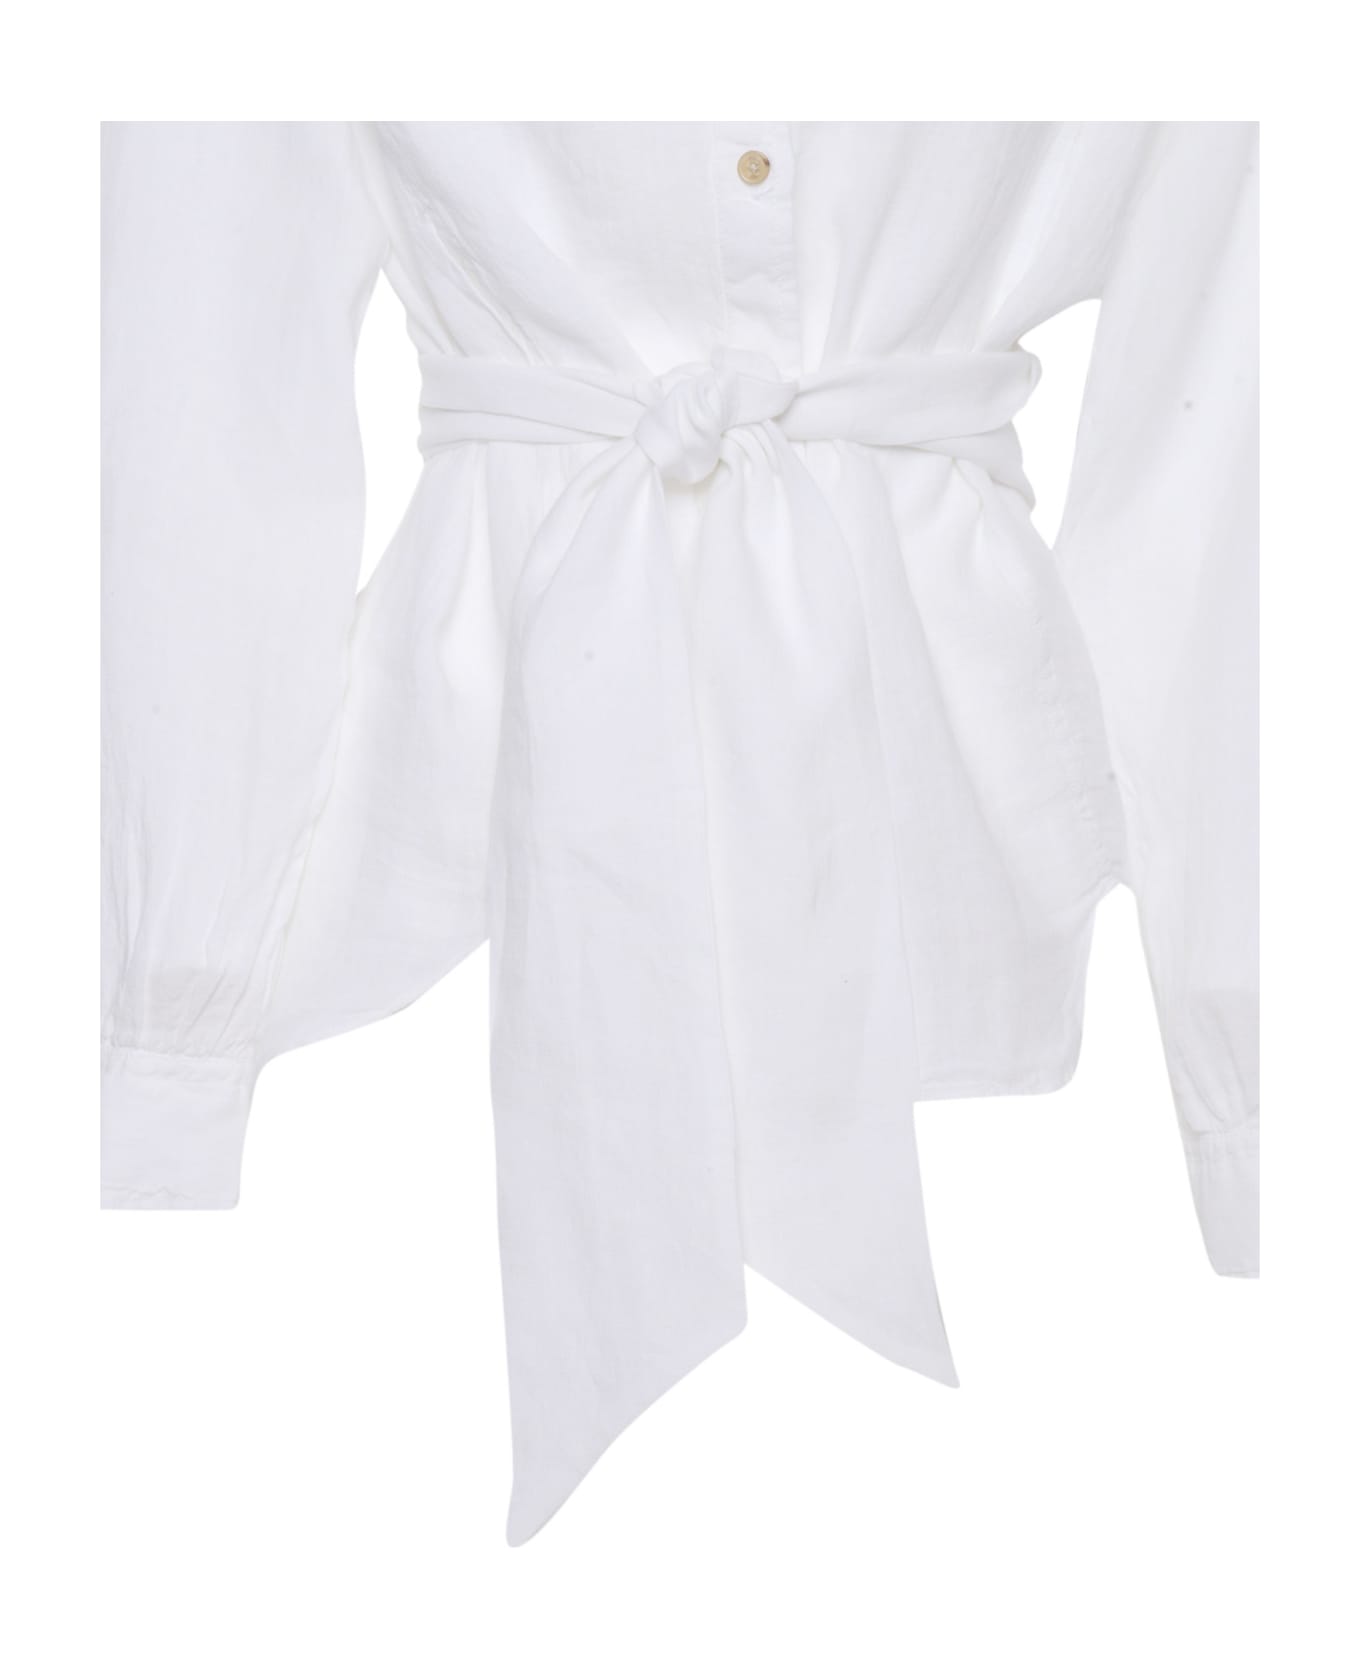 Fay Shirt With Bow - WHITE